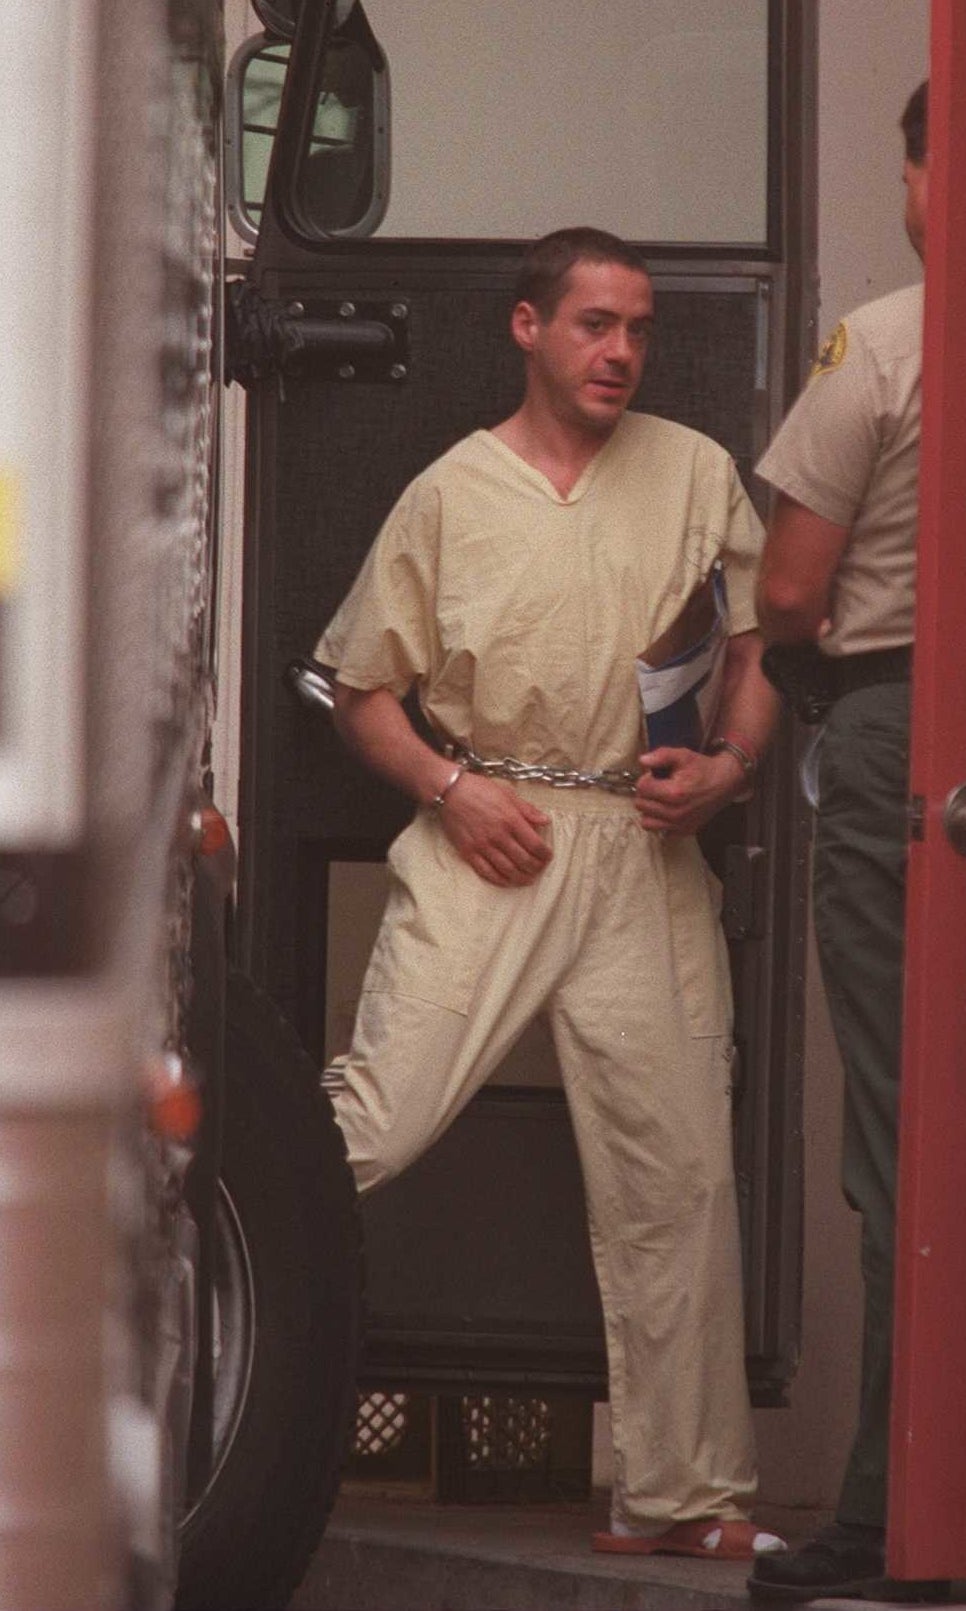 Robert Downey Jr arrives for a bail hearing in July 1996